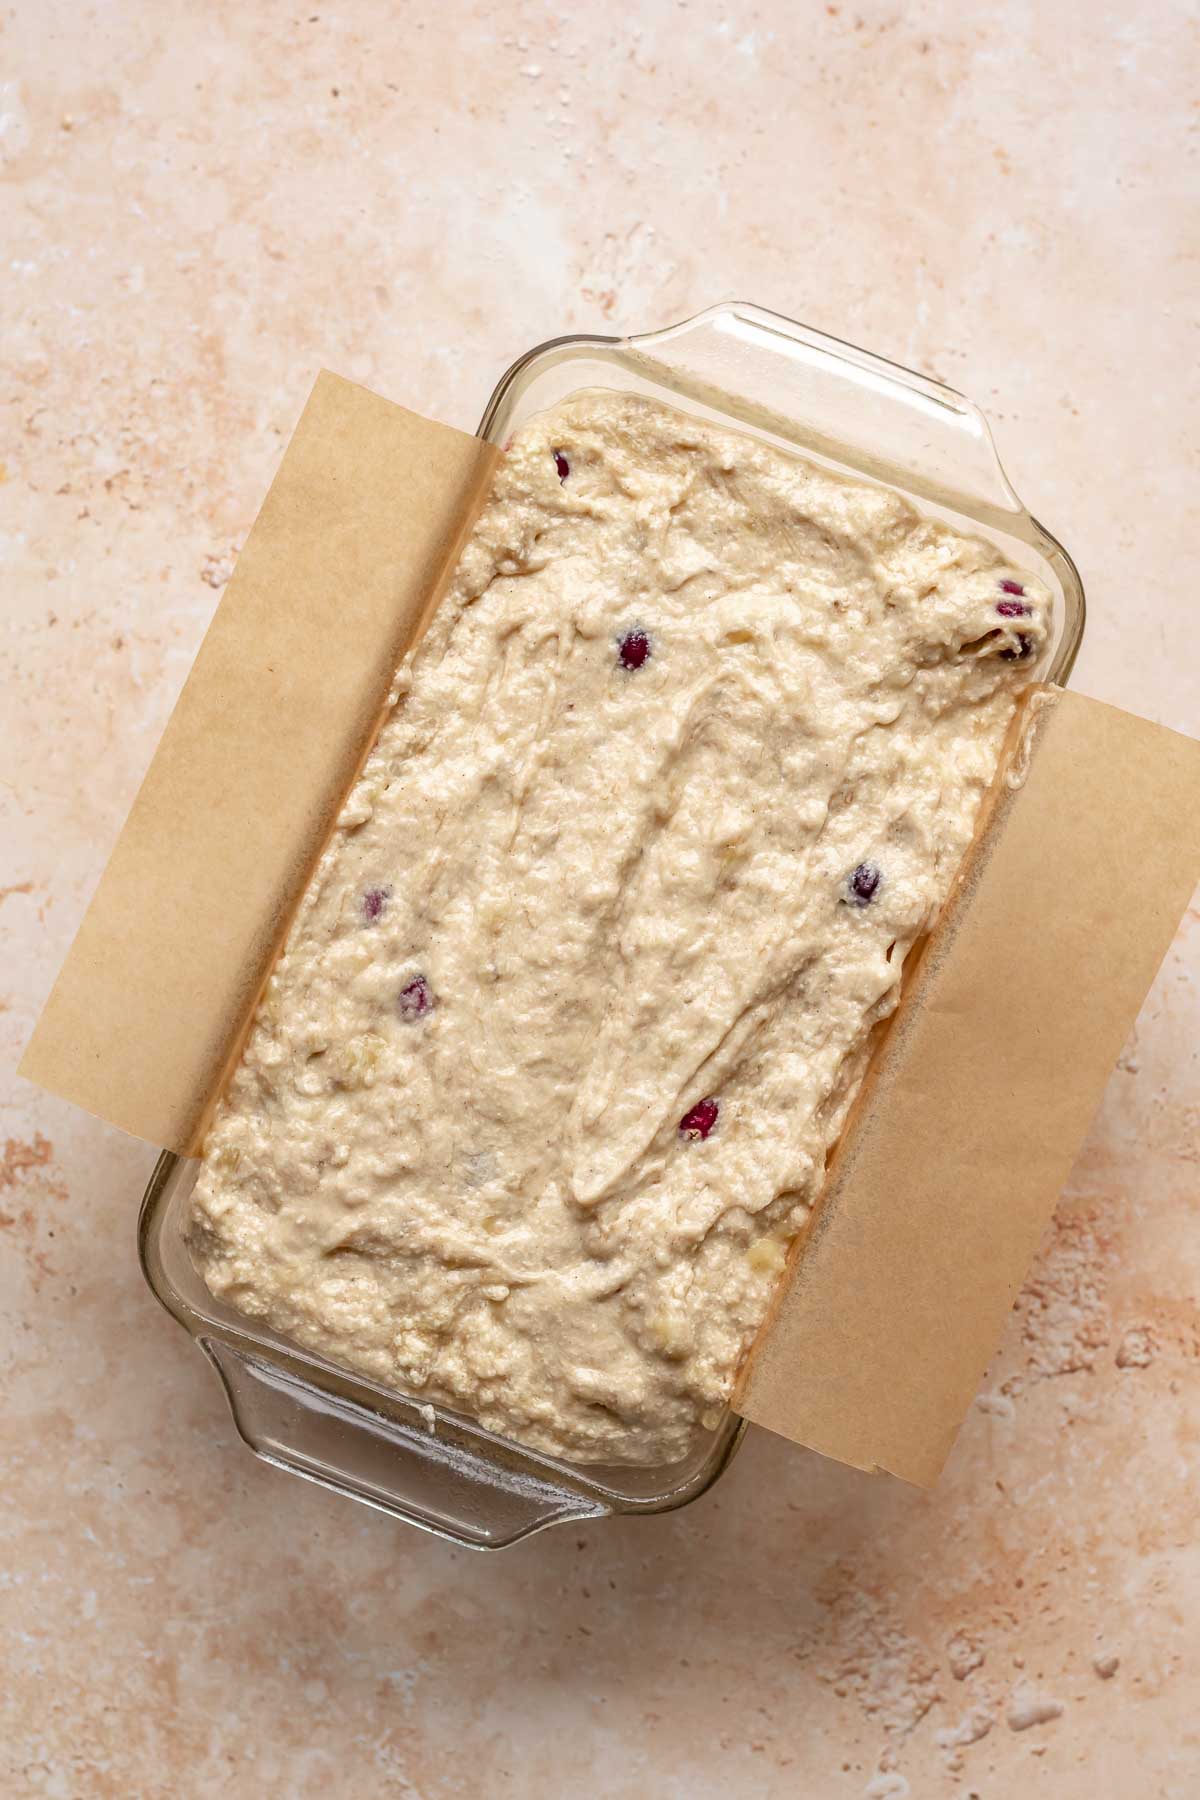 Banana cranberry bread in a loaf pan before baking.